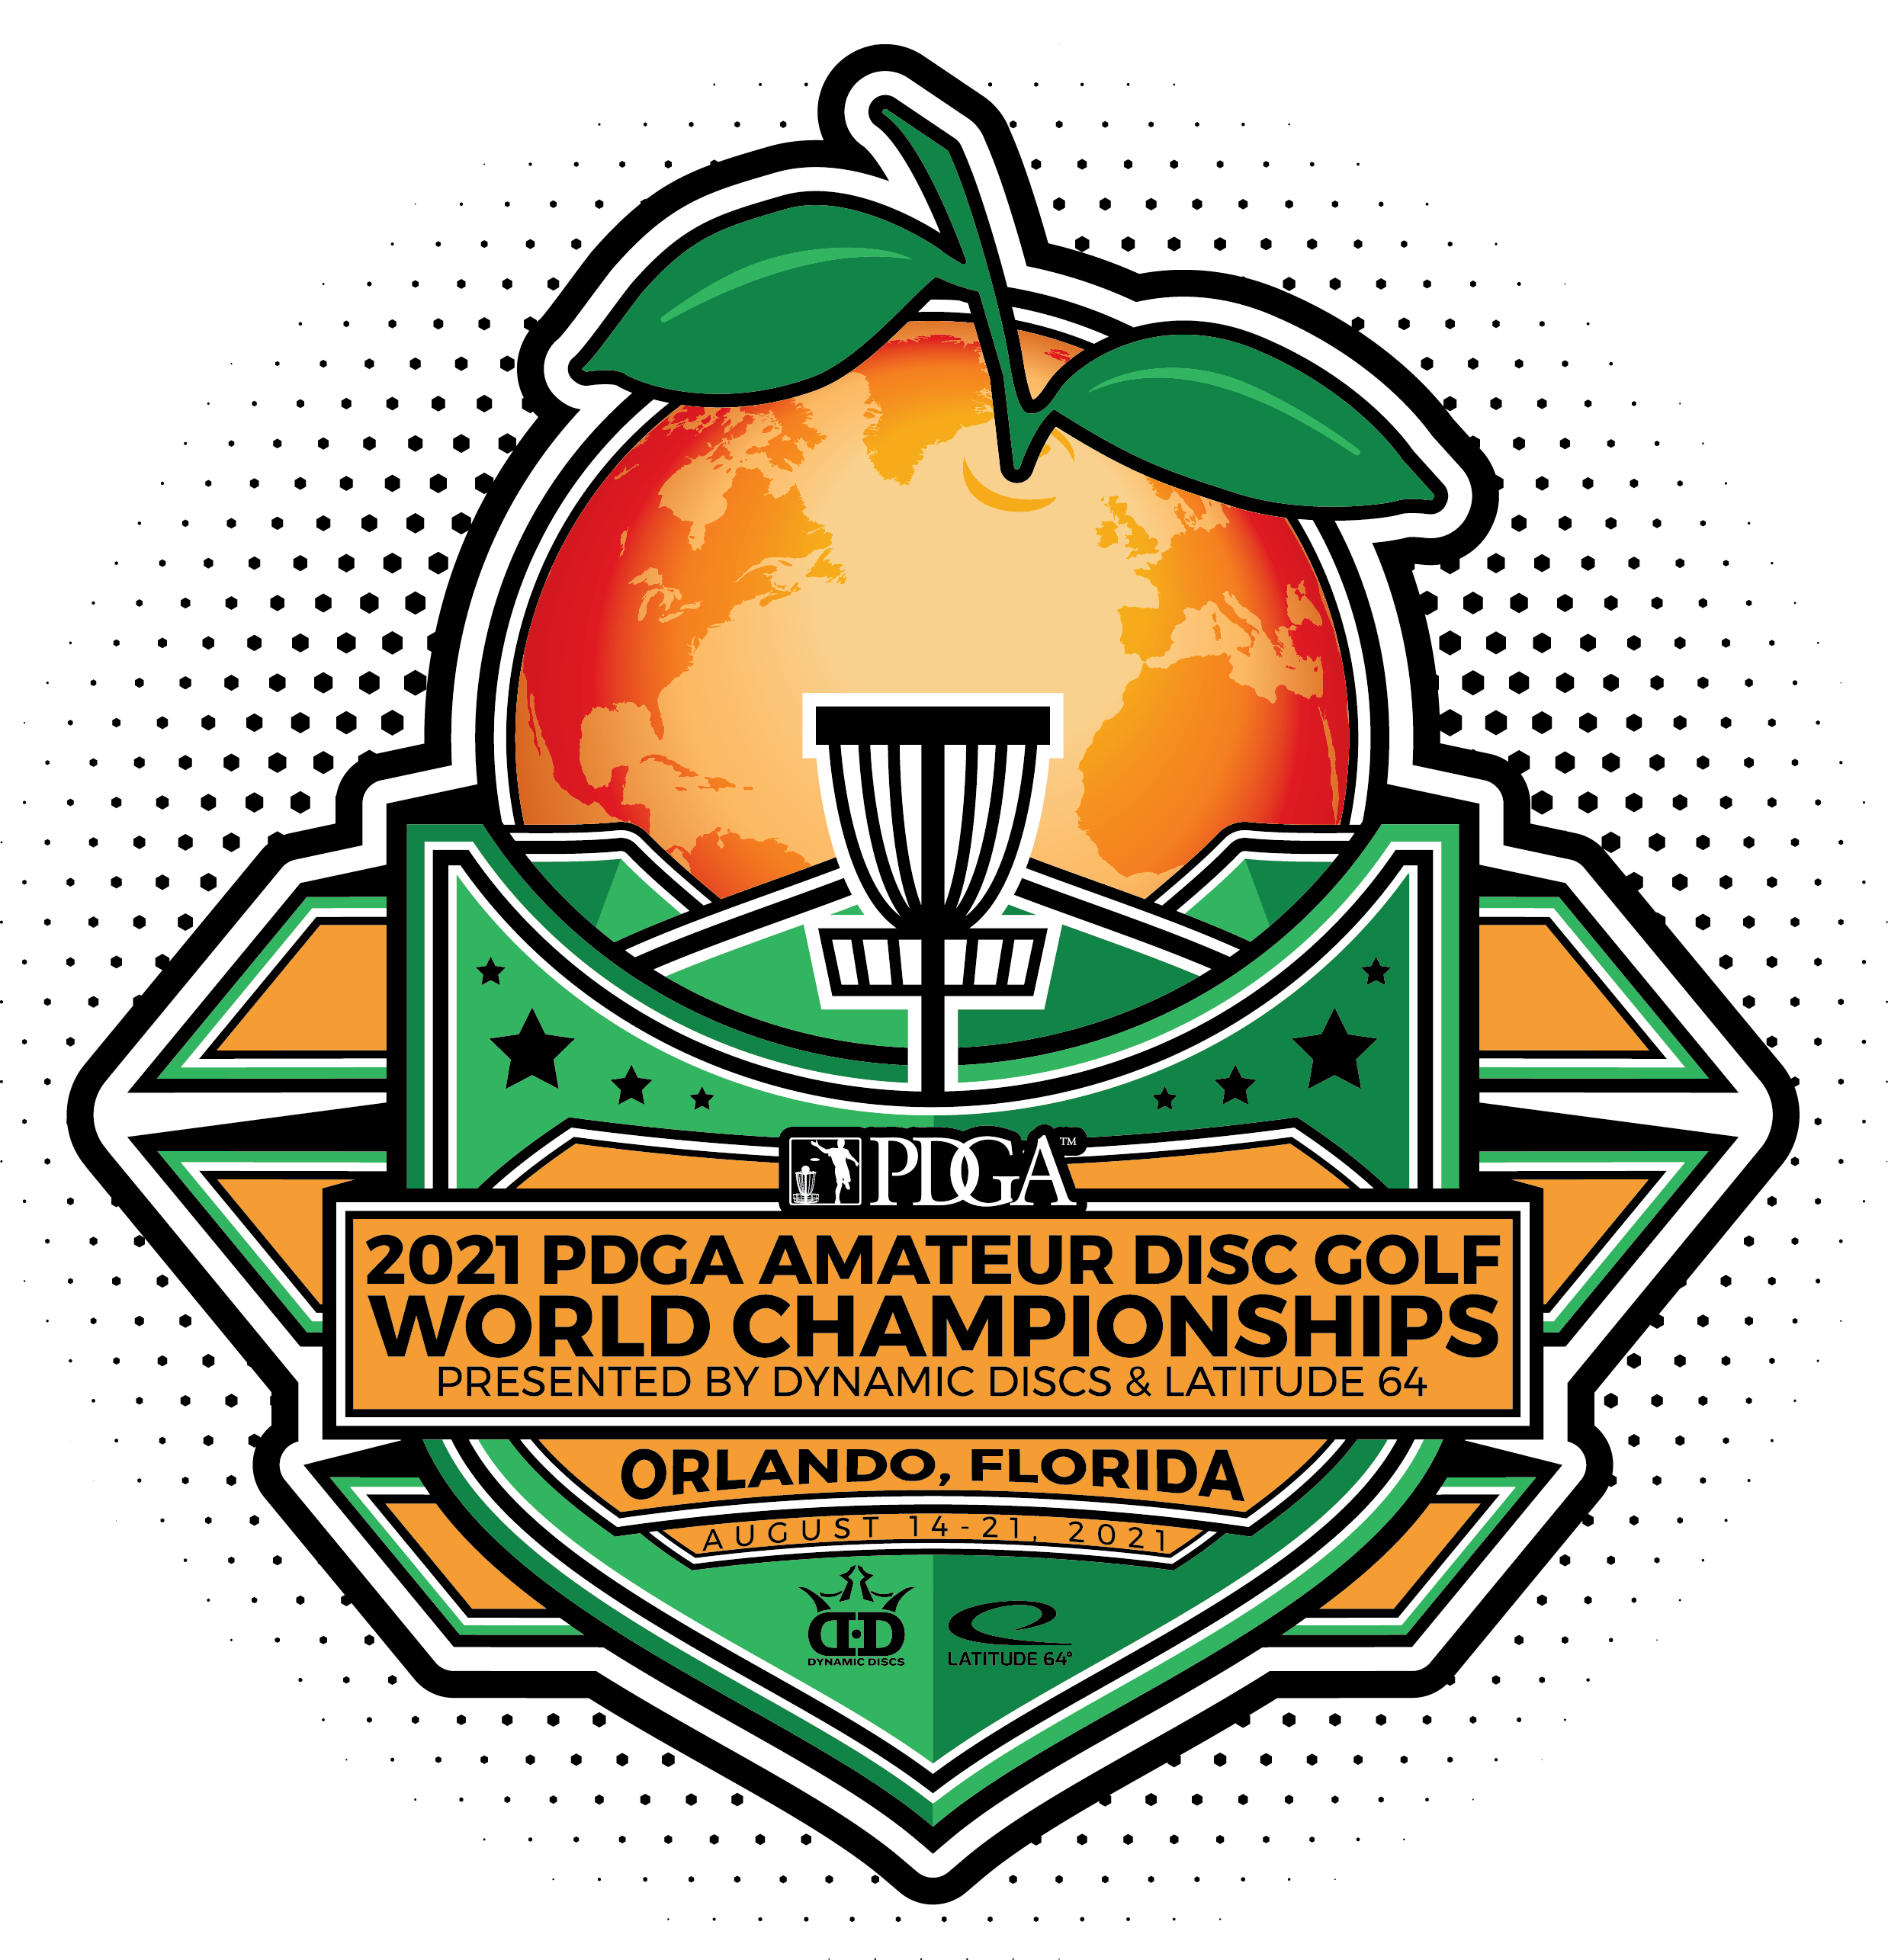 2021 PDGA Amateur Disc Golf World Championships presented by Dynamic